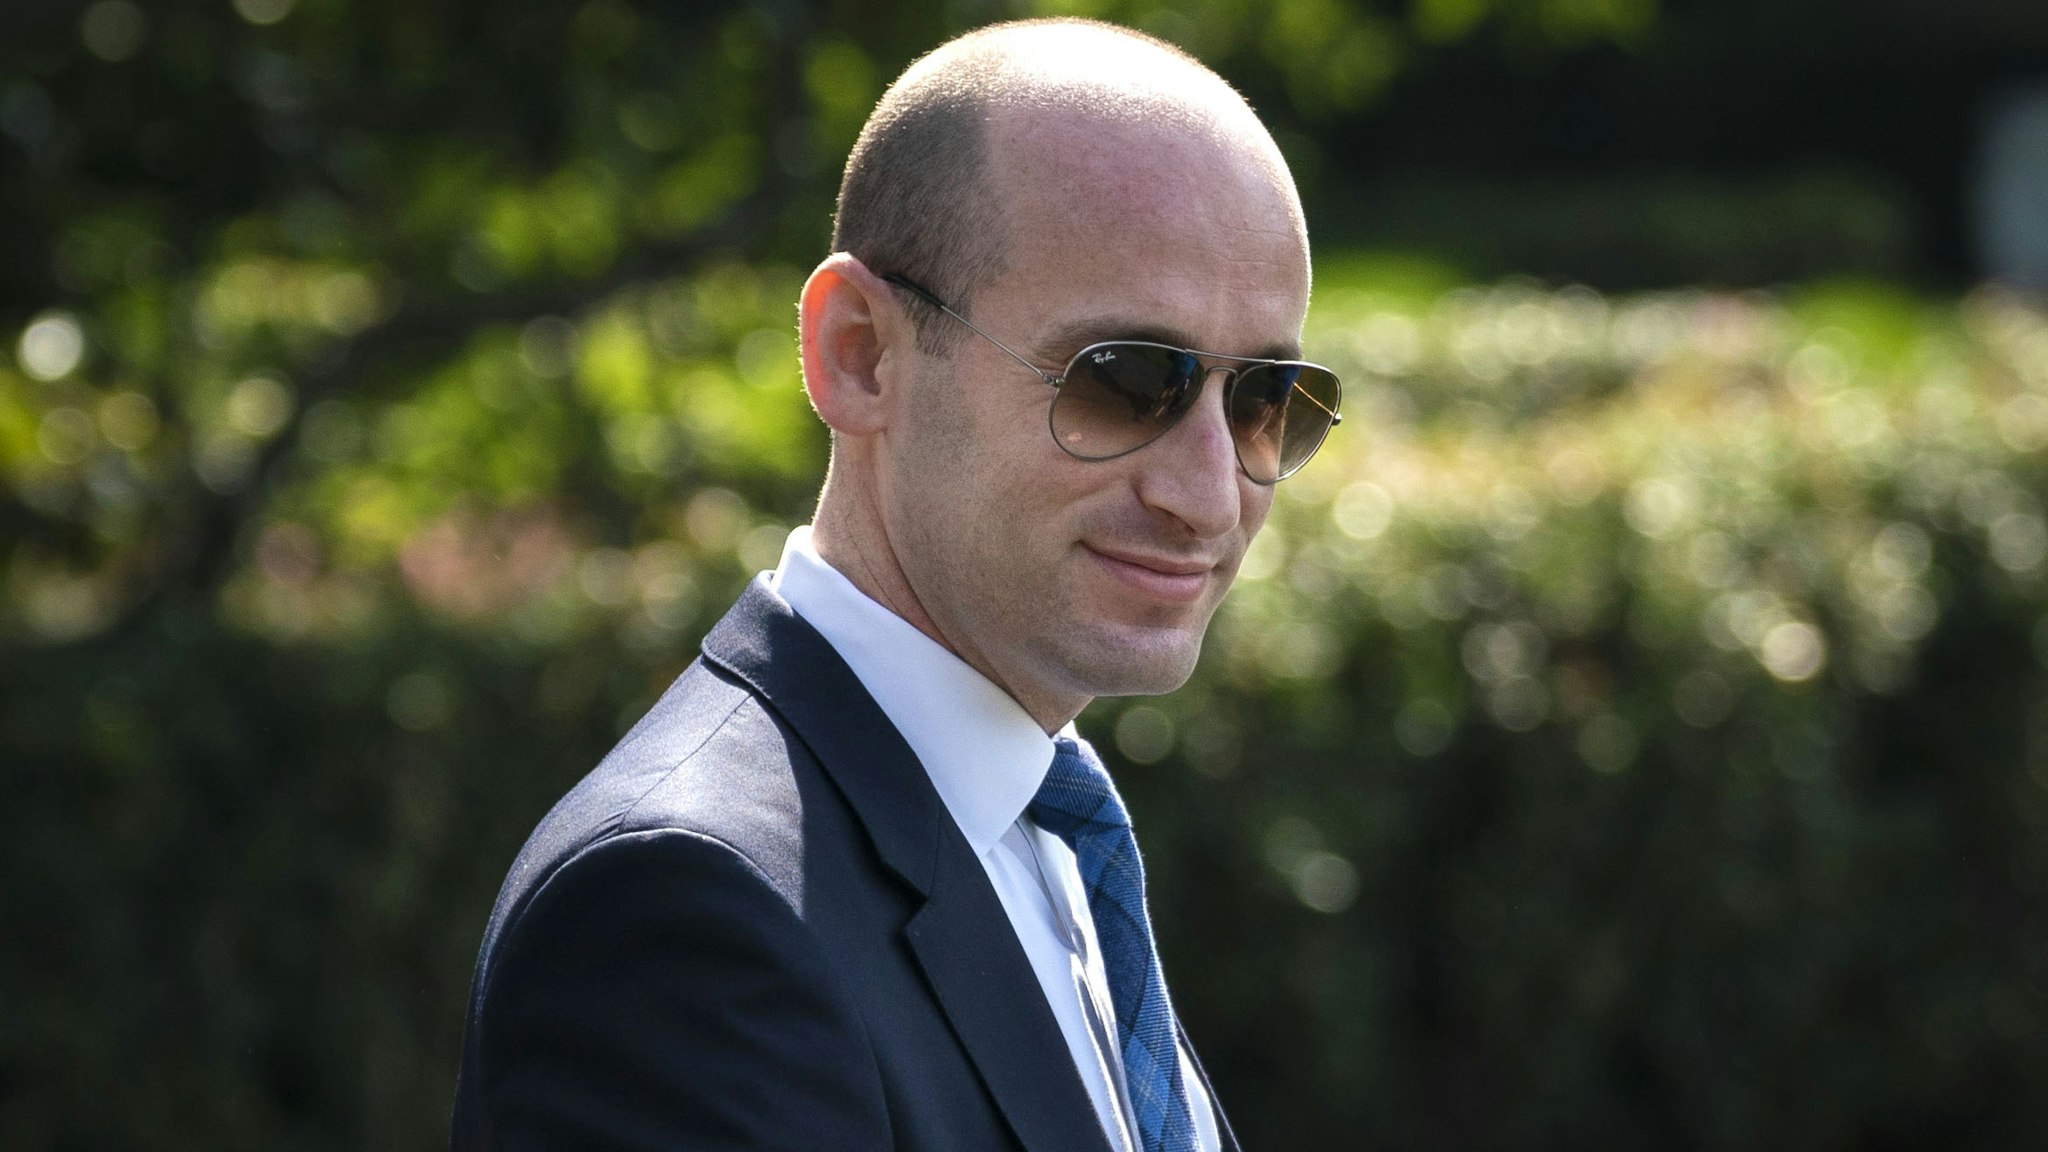 WASHINGTON, DC - JUNE 23: Senior Advisor Stephen Miller walks to Marine One on the South Lawn of the White House on June 23, 2020 in Washington, DC. President Trump is traveling to Arizona, where he will tour border-wall-construction operations in Yuma, later speaking to a conservative advocacy group in Phoenix.